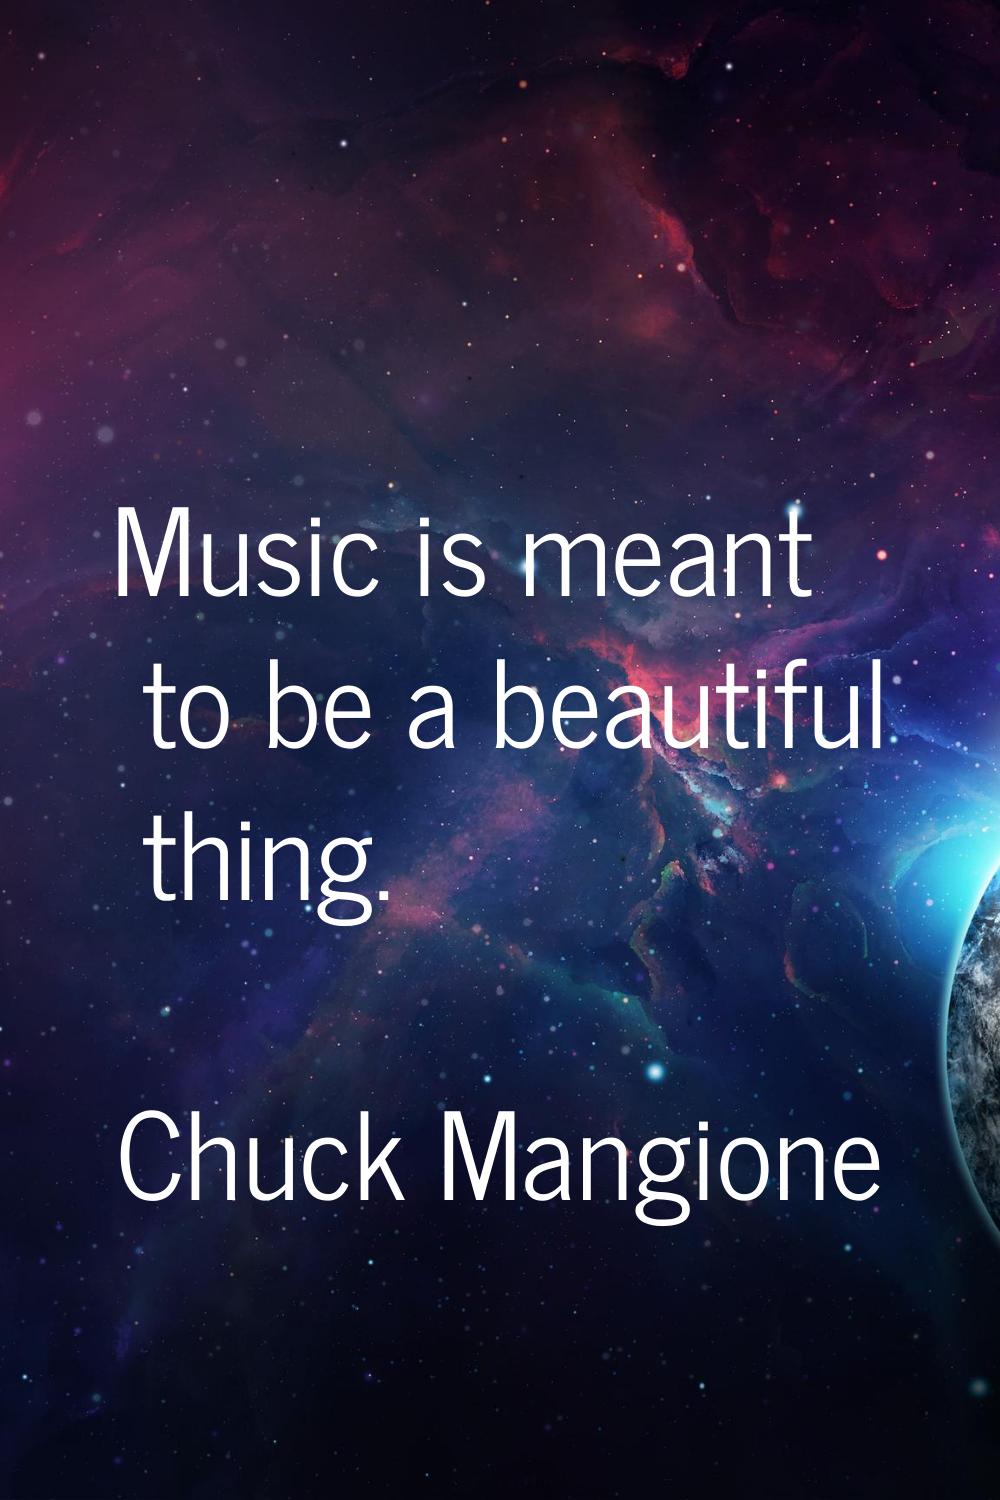 Music is meant to be a beautiful thing.